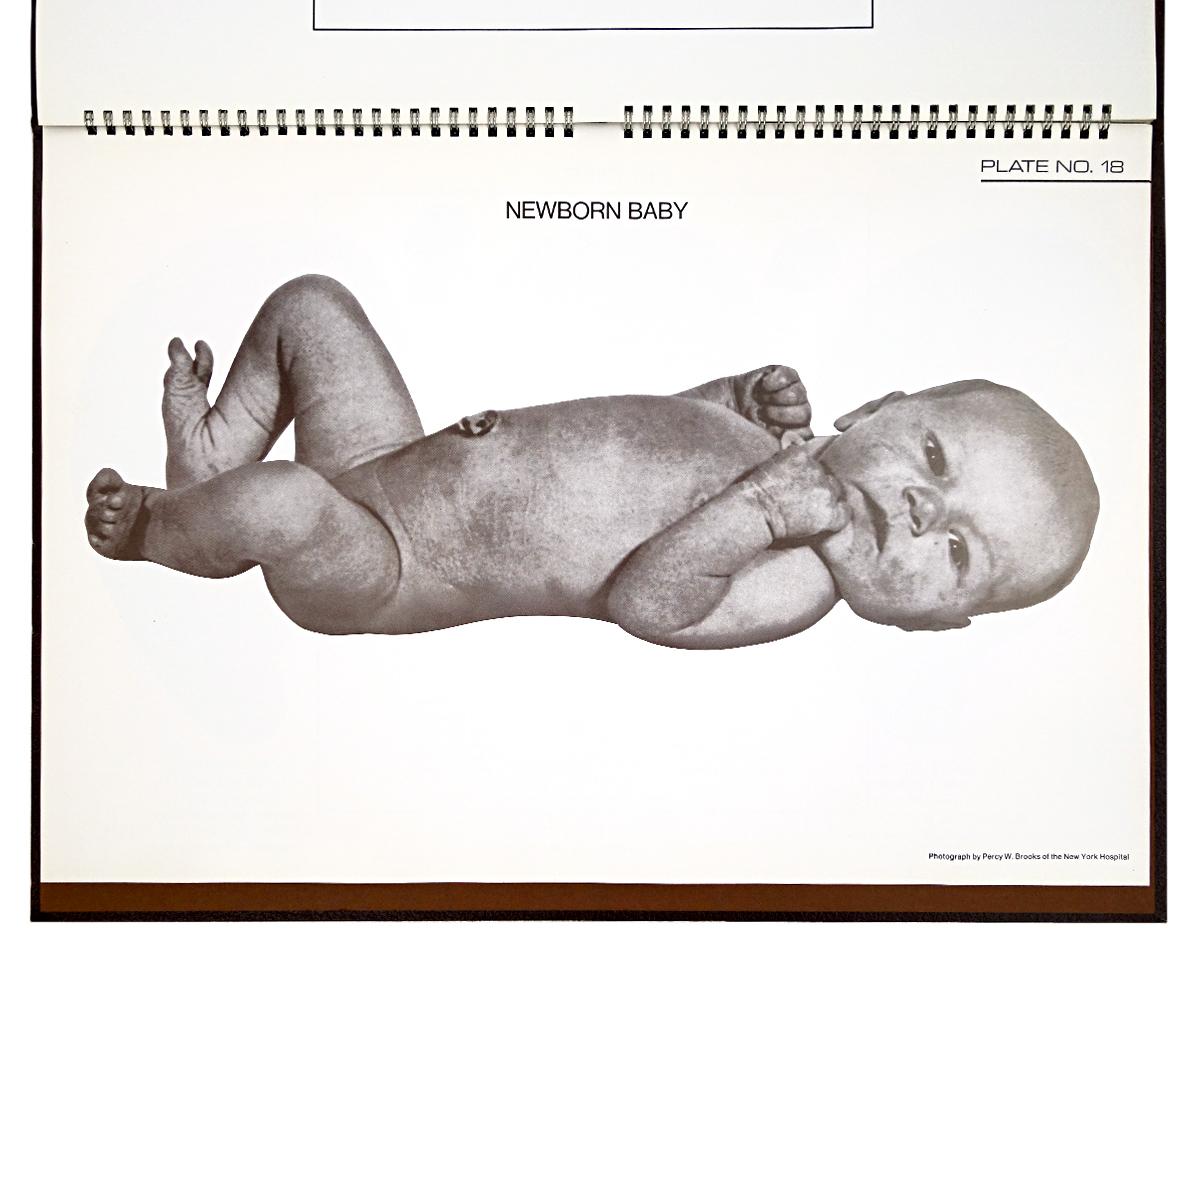 Birth Atlas by the Maternity Center Association in New York 1